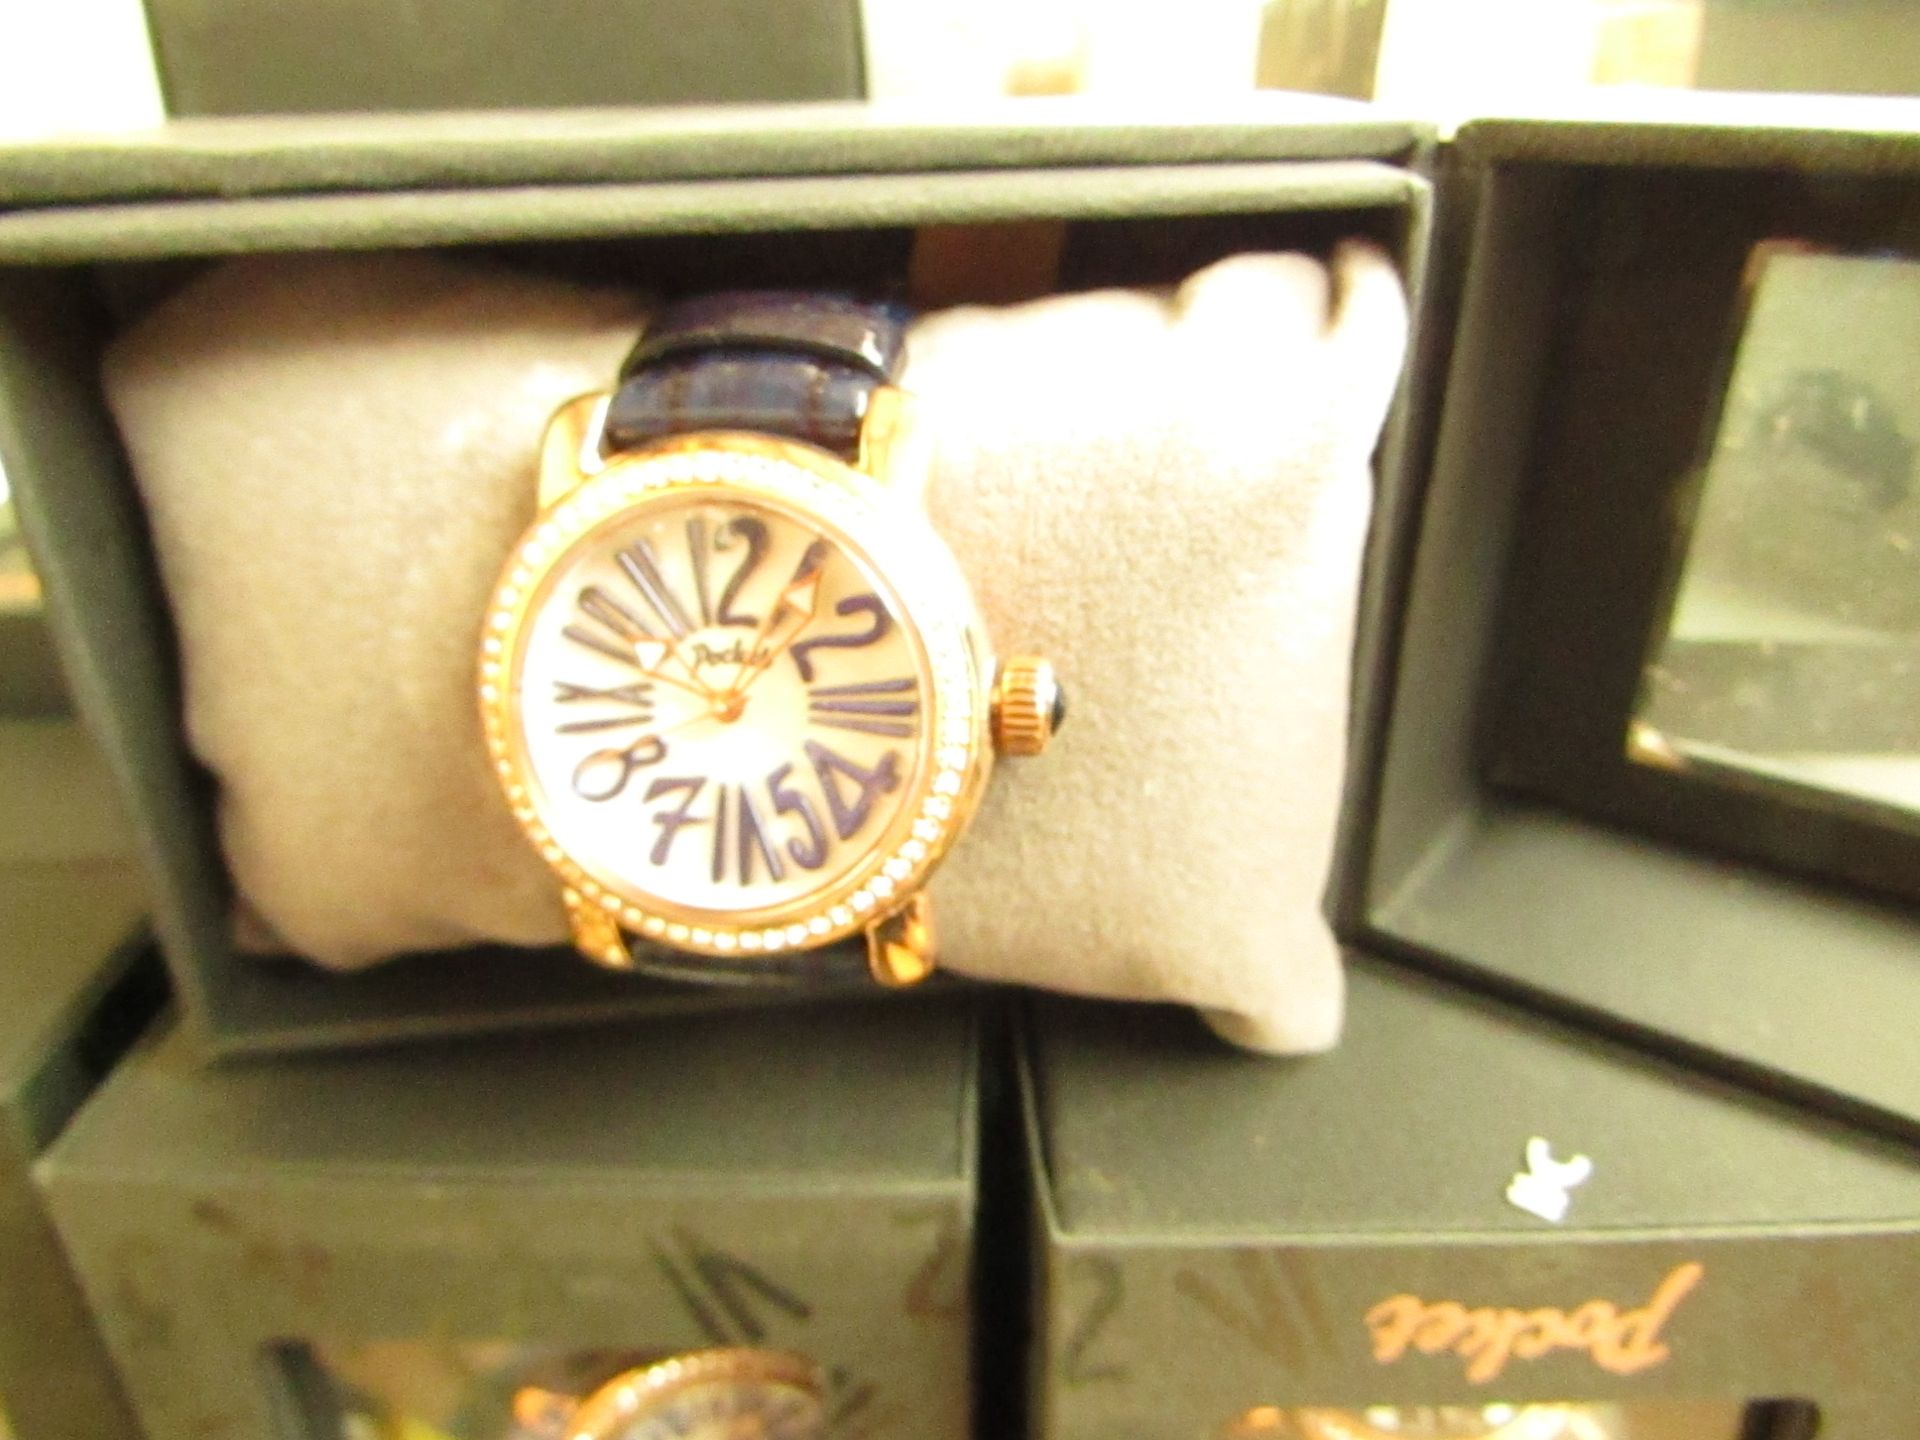 Pocket Branded Watch. See image For Display